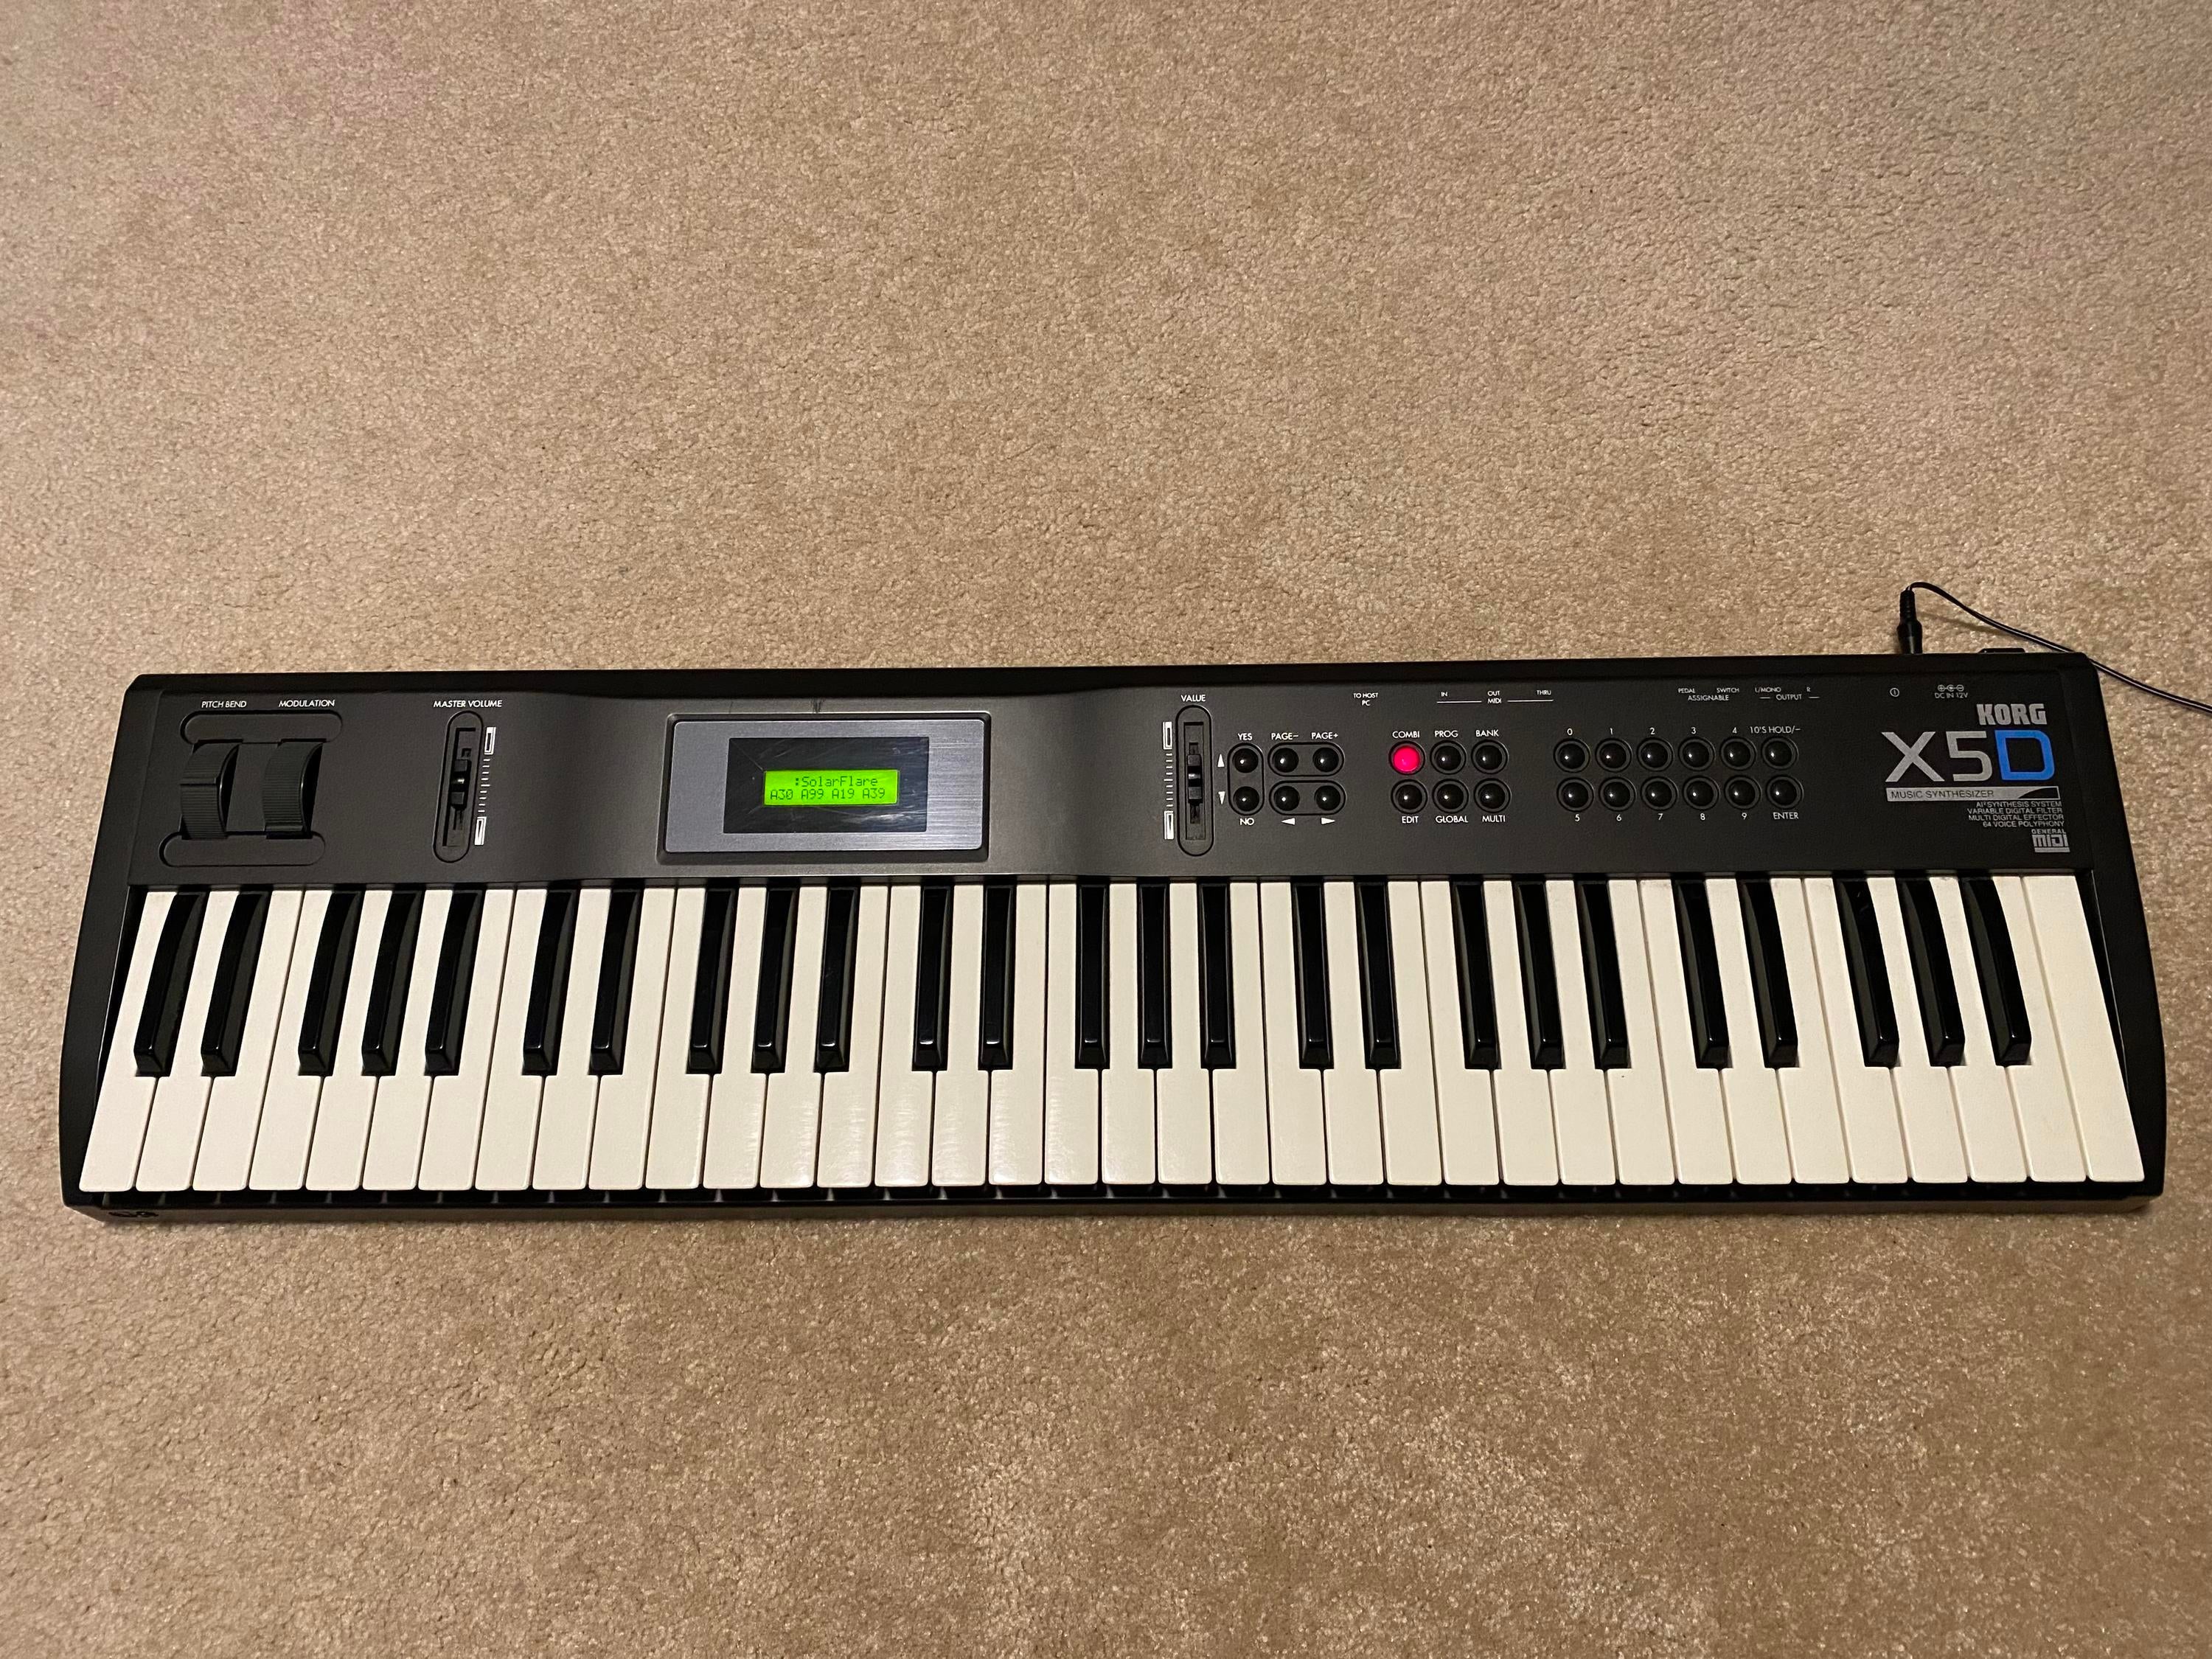 Used Korg X5D Synthesizer - Sweetwater's Gear Exchange